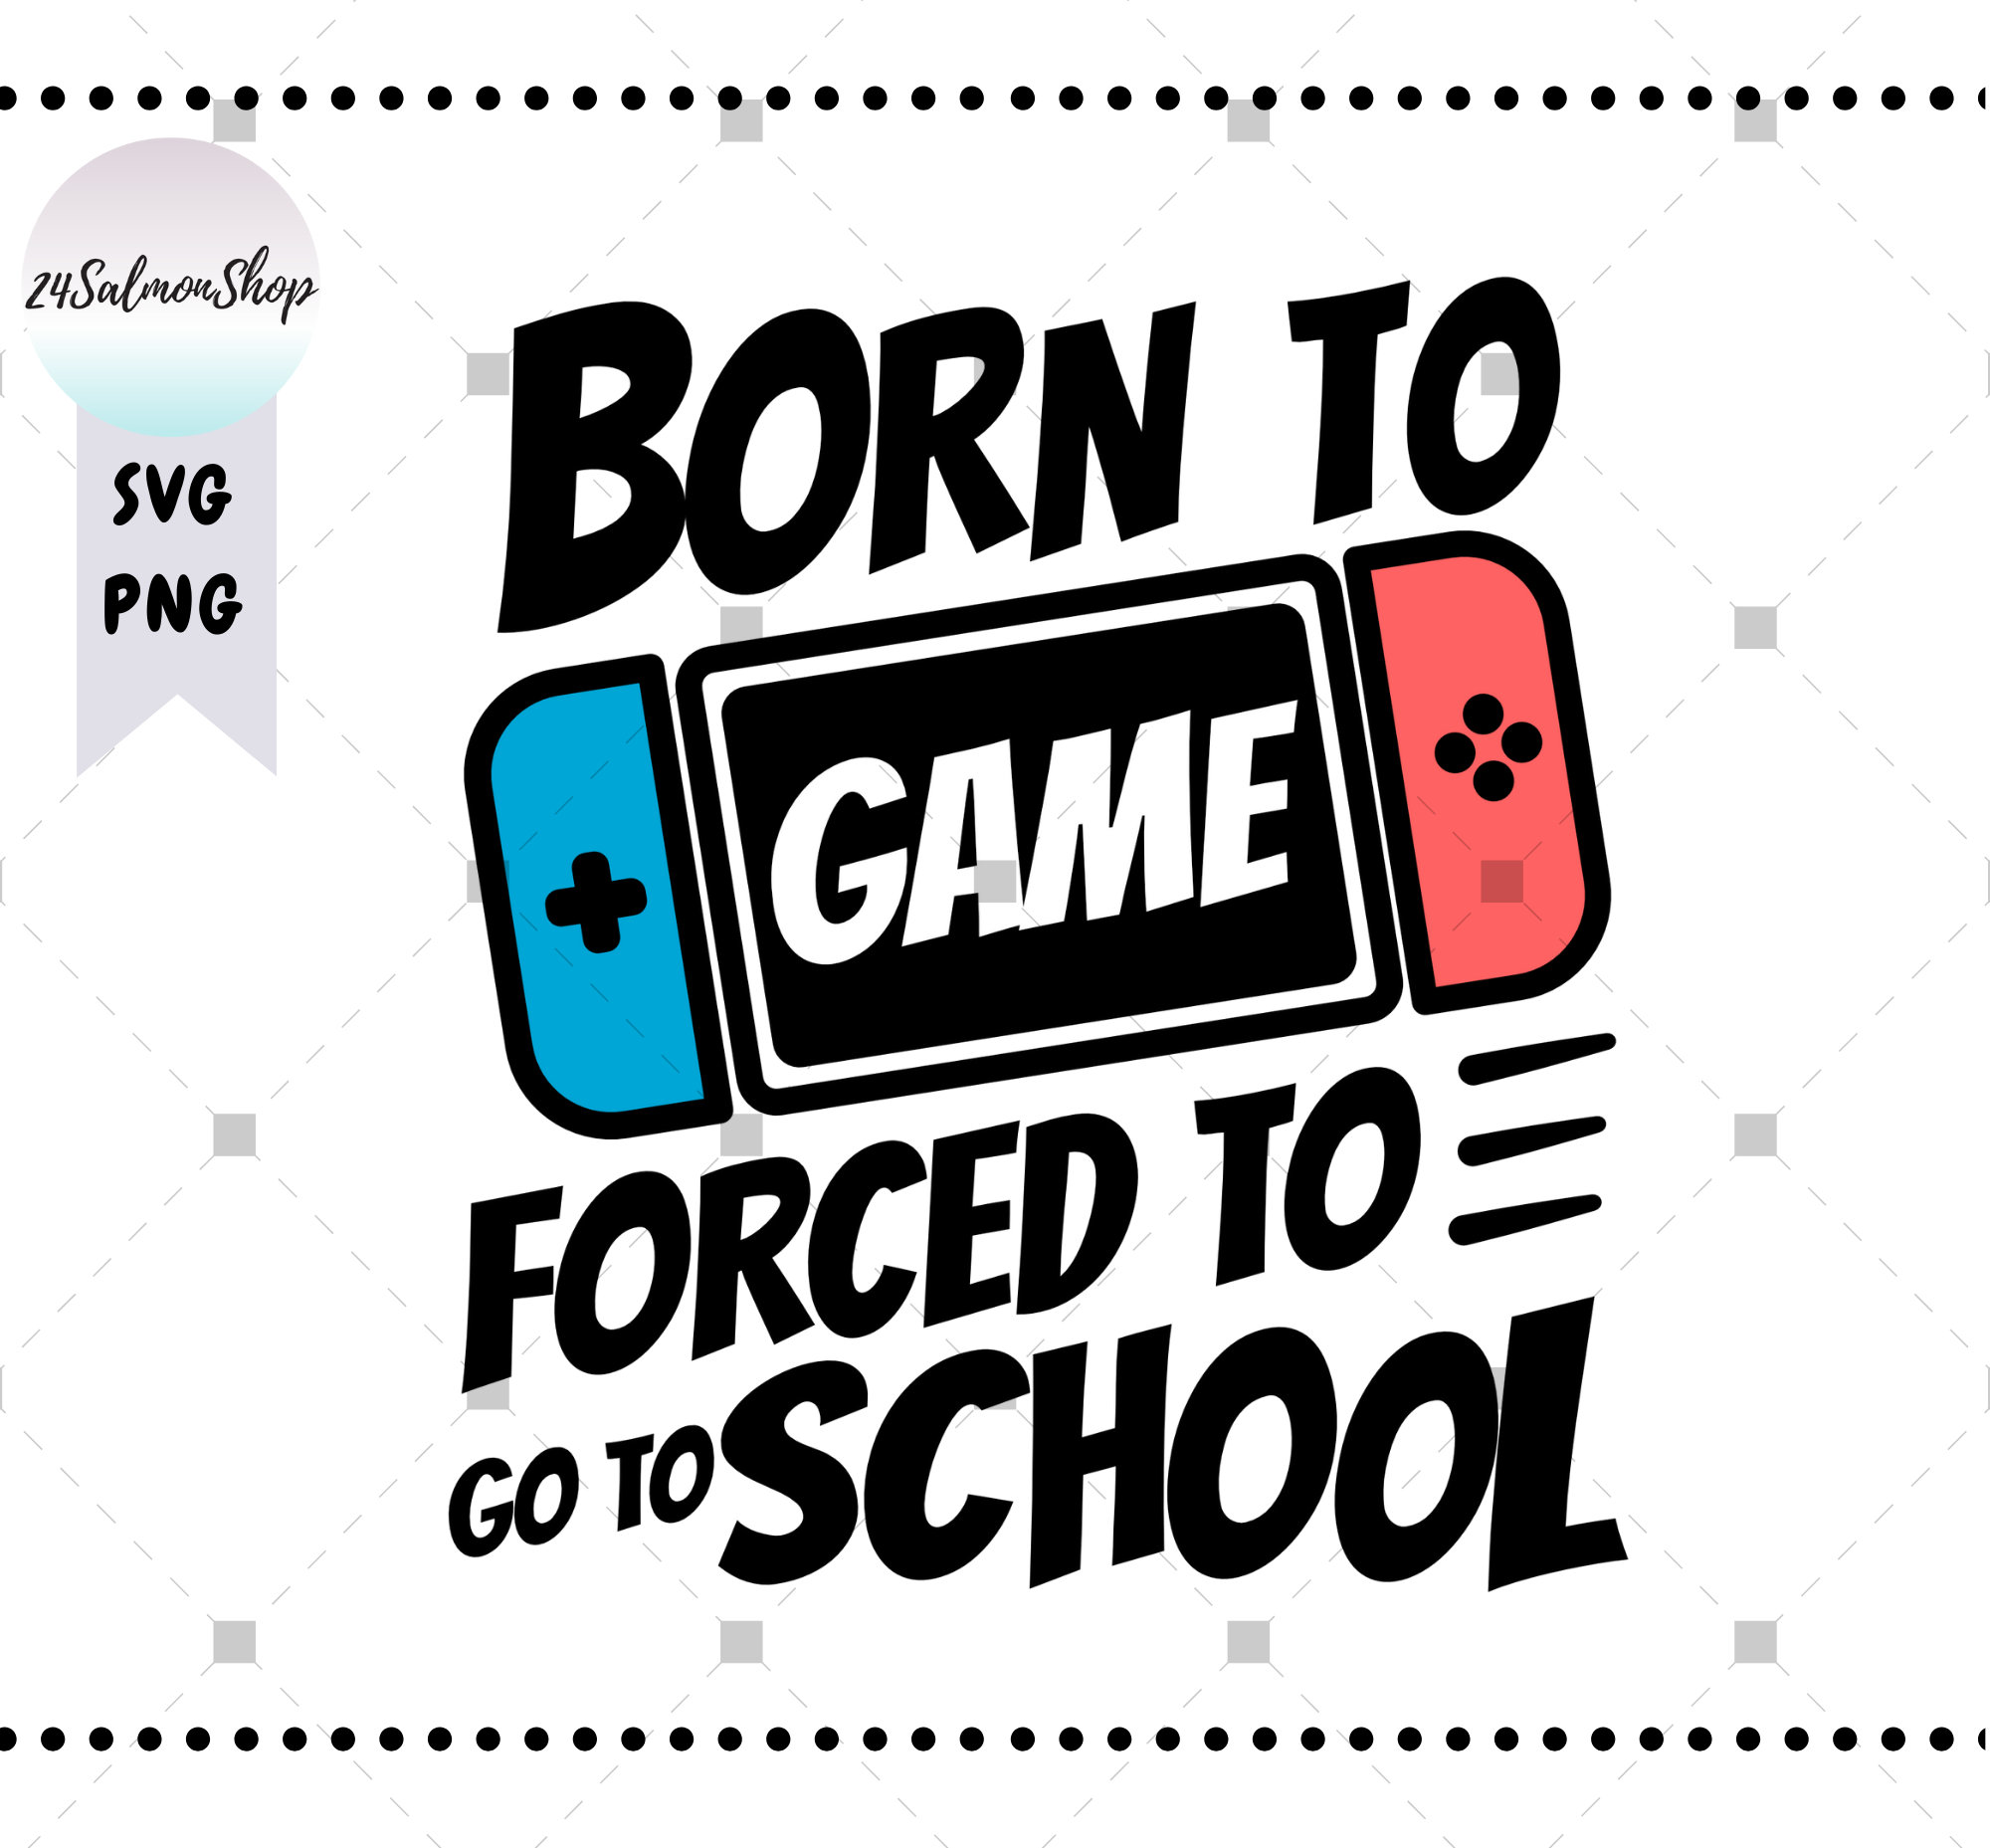 born to play roblox , forced to go to school Kids T-Shirt for